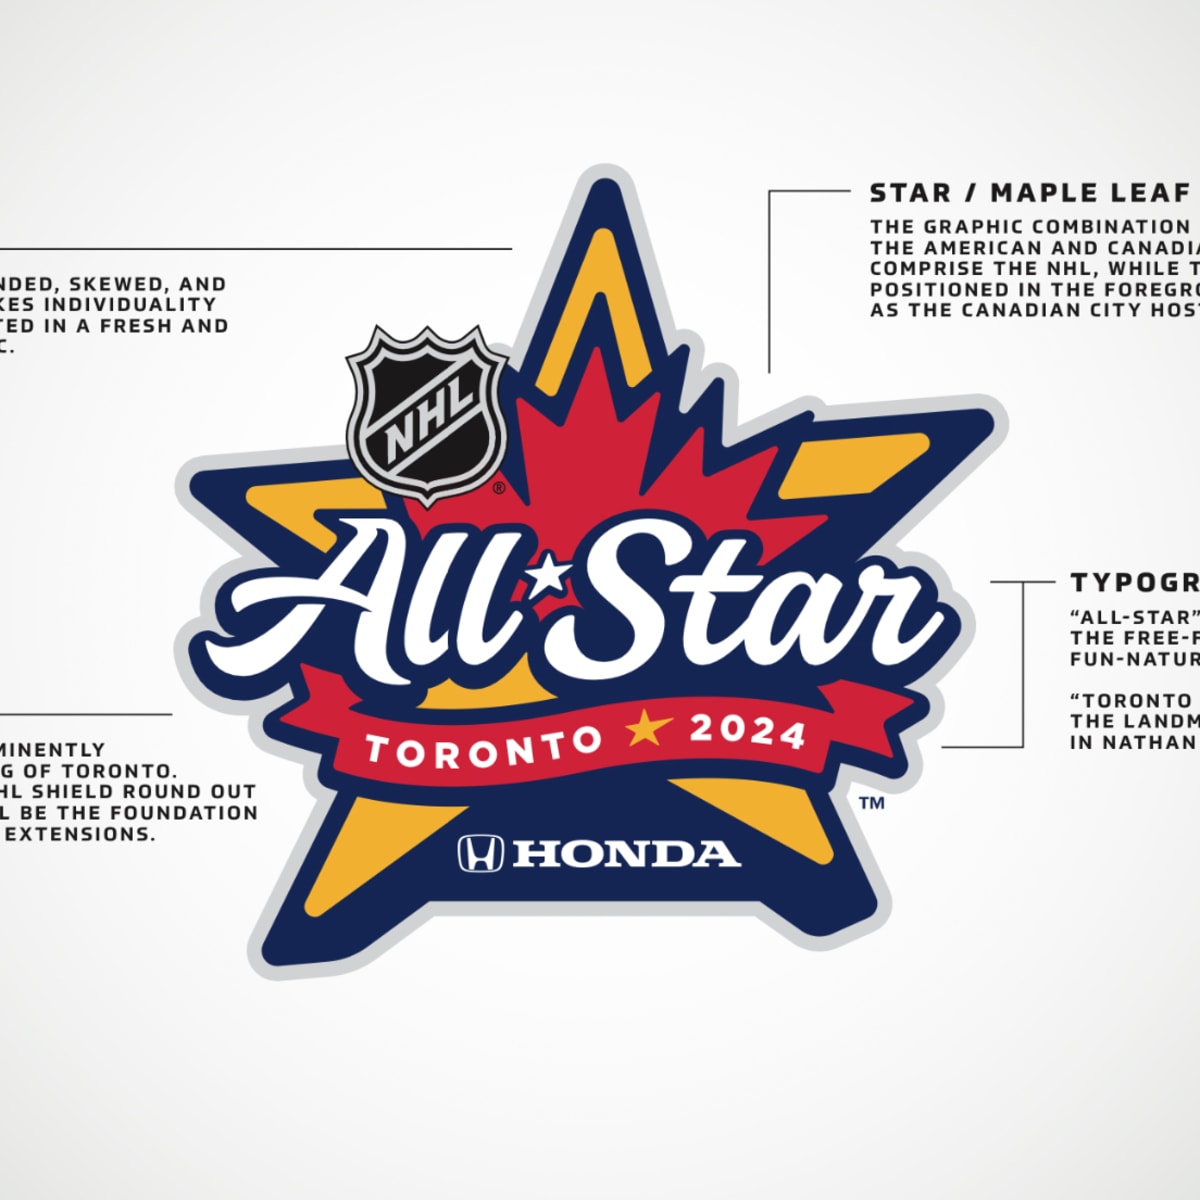 Another Member of the Toronto Maple Leafs has Made the All-Star Game